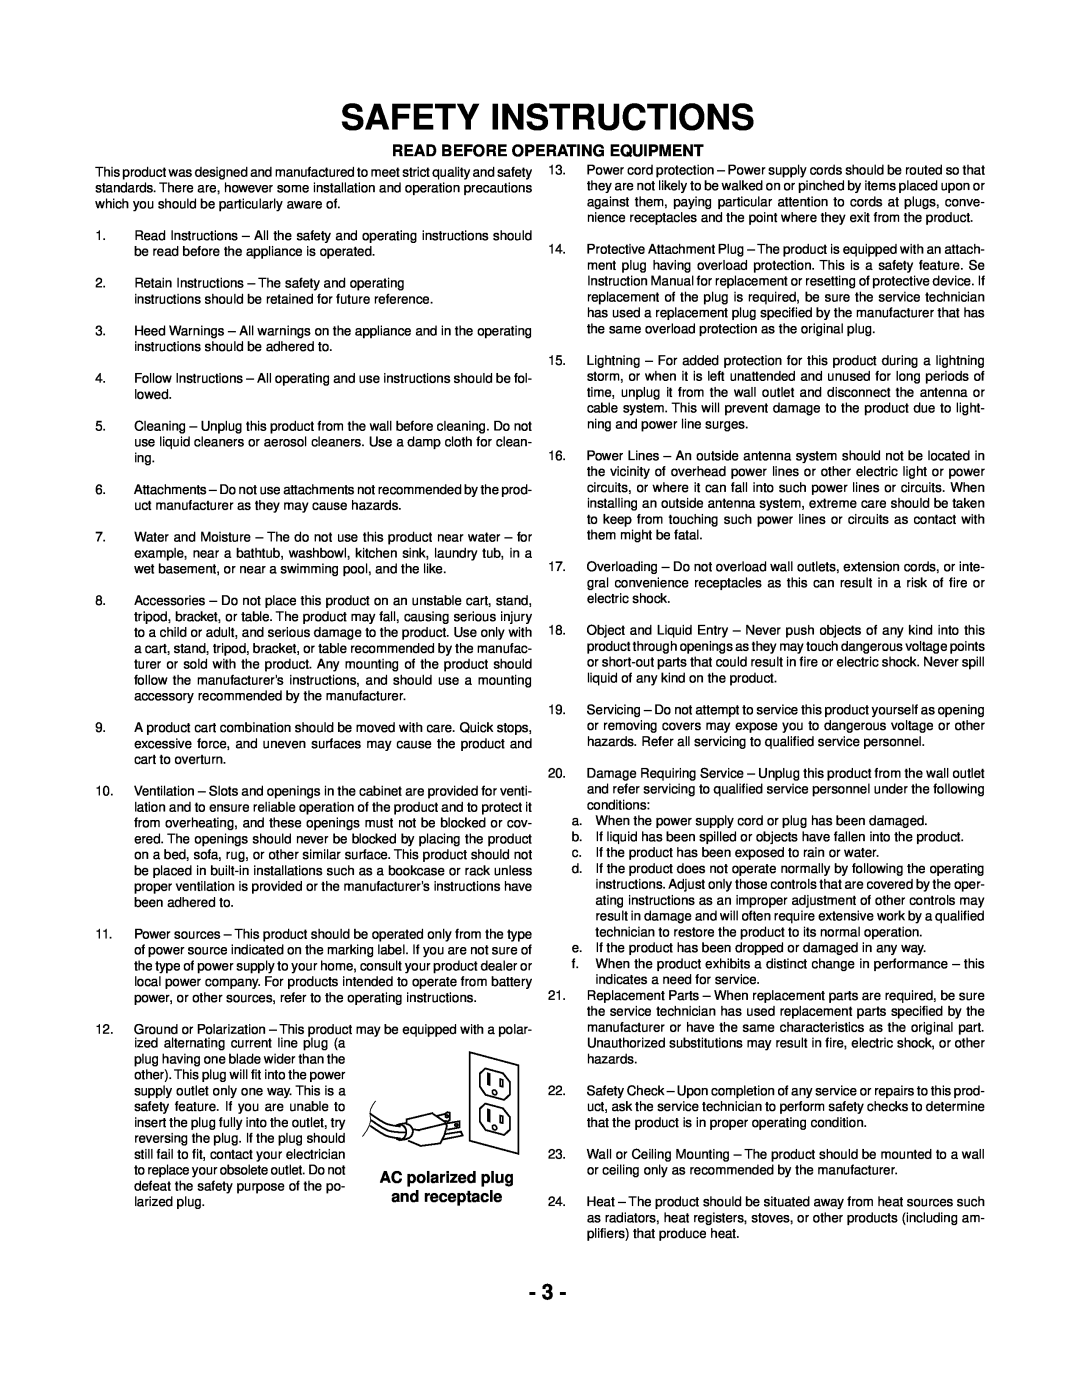 Marantz CDR300 manual Safety Instructions, Read Before Operating Equipment 